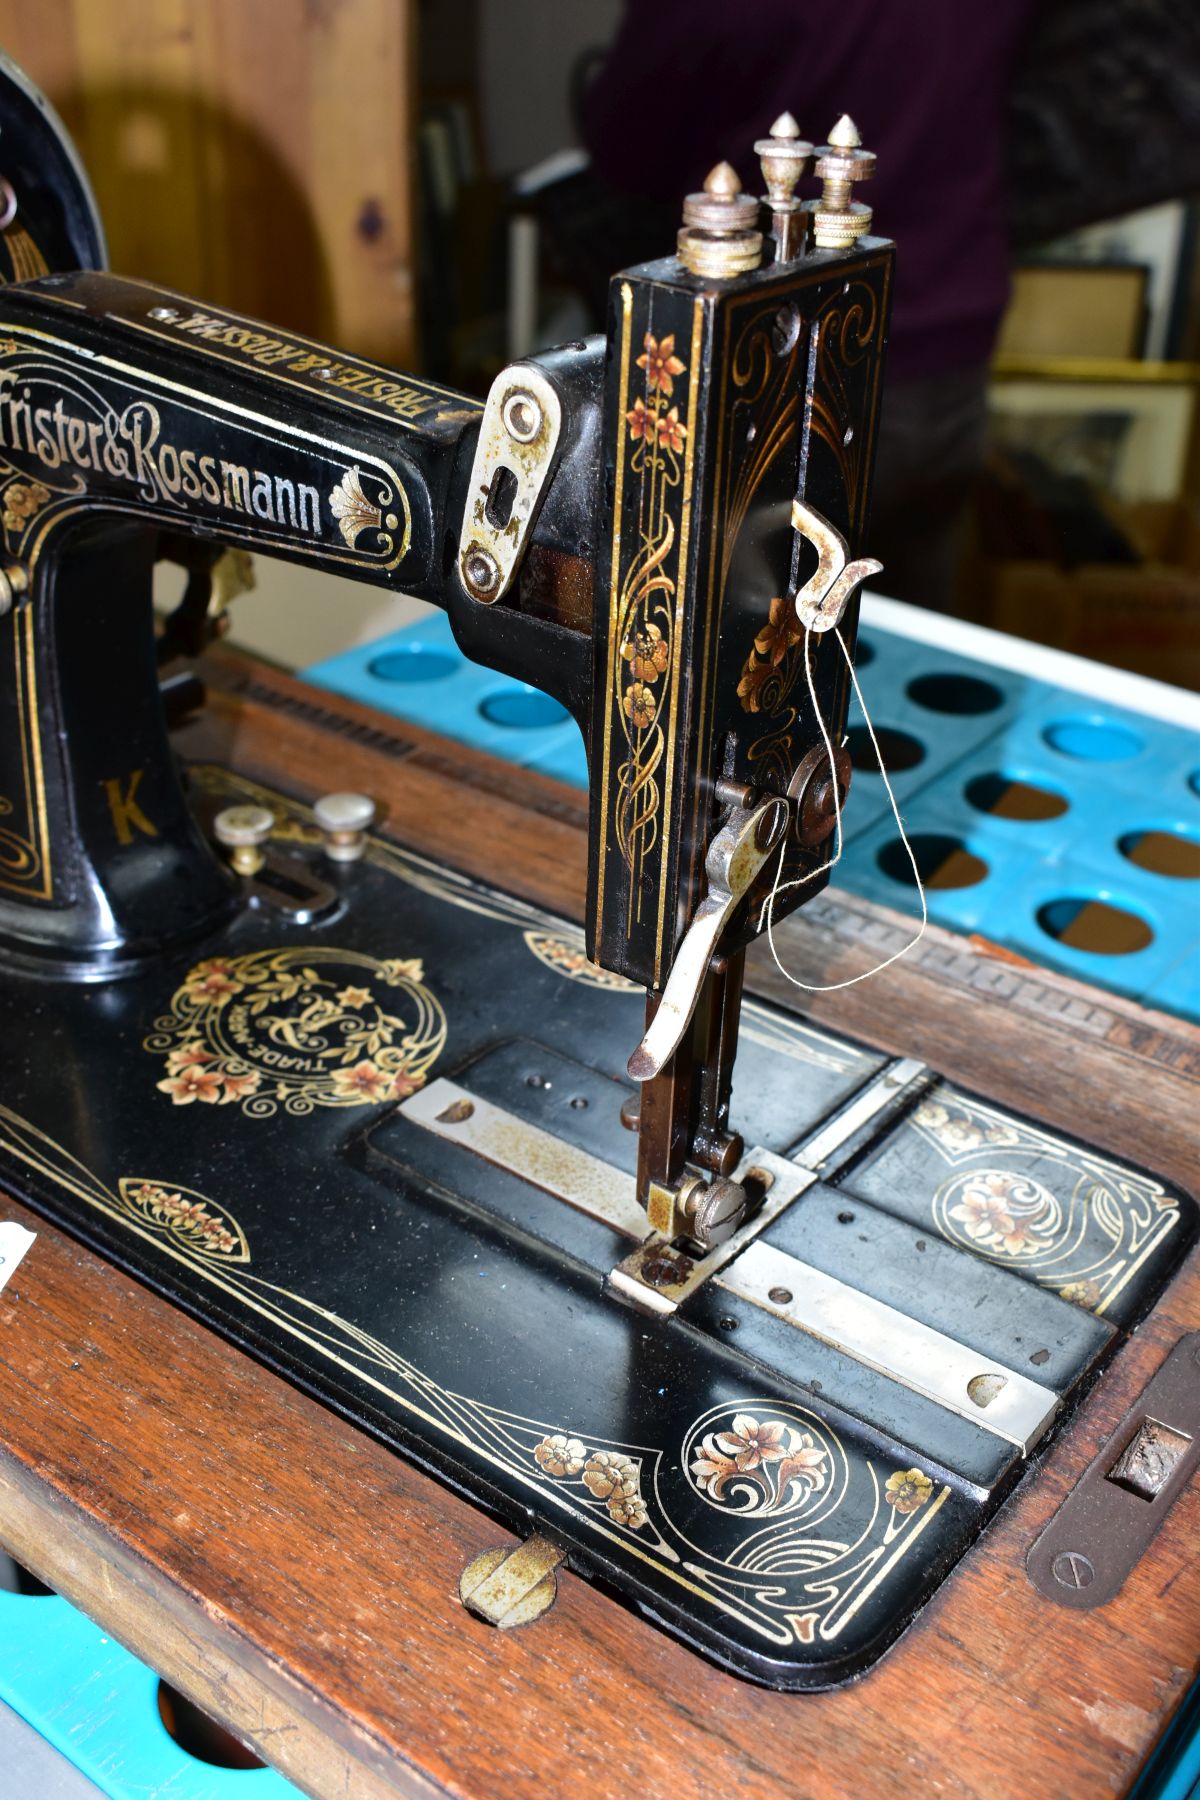 A FRISTER & ROSSMAN CAST IRON SEWING MACHINE, machine and floral decoration in fairly good - Image 2 of 5